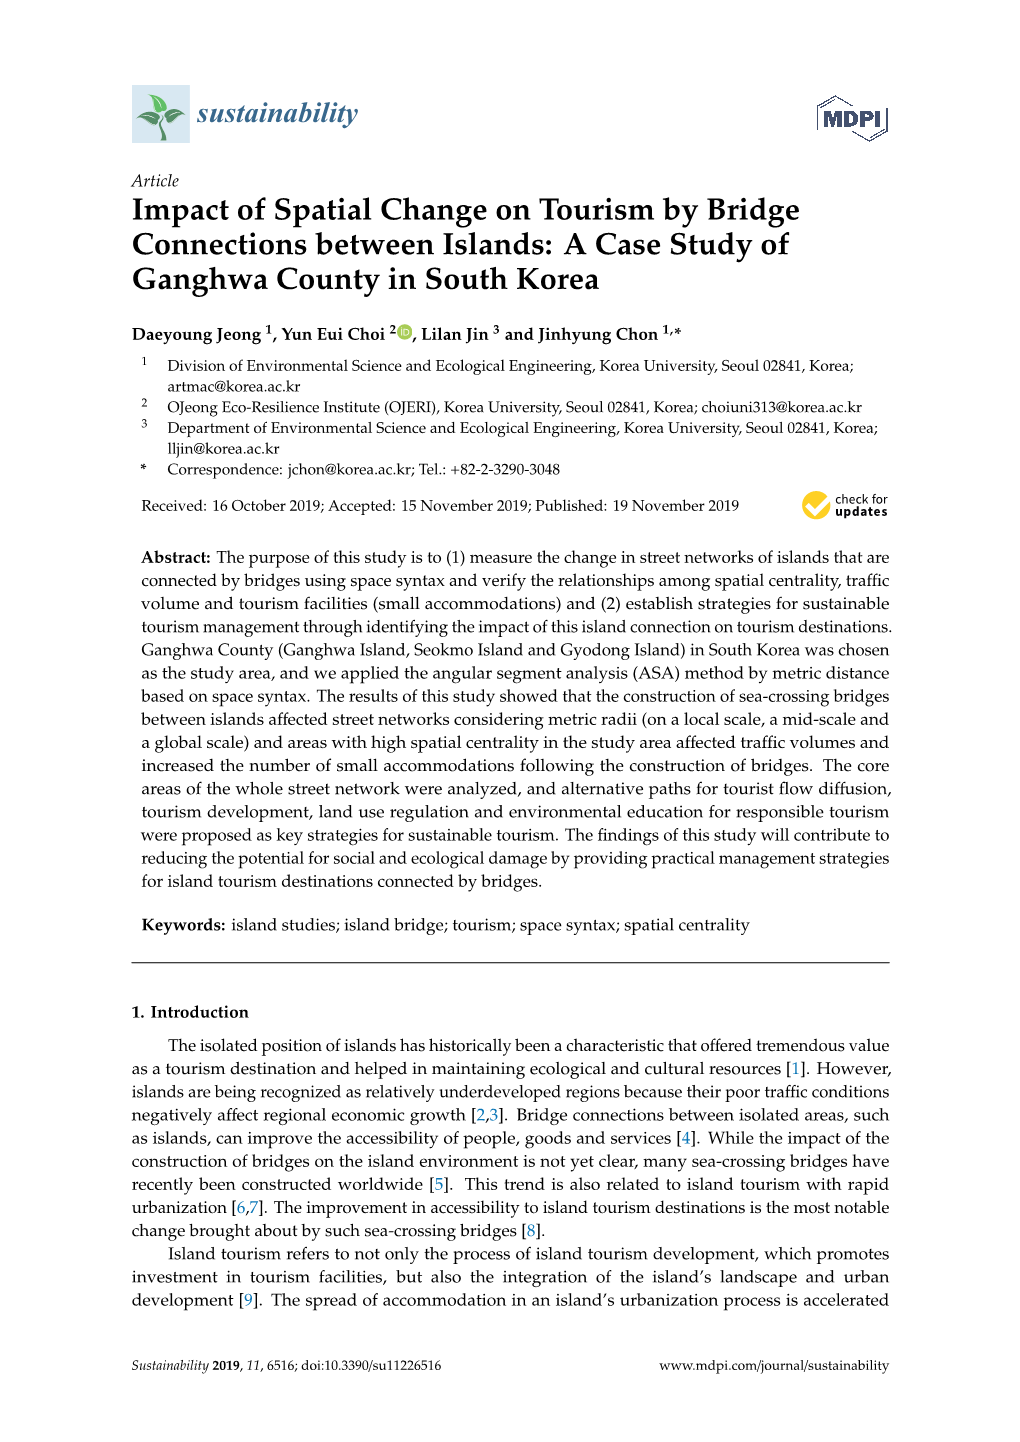 Impact of Spatial Change on Tourism by Bridge Connections Between Islands: a Case Study of Ganghwa County in South Korea